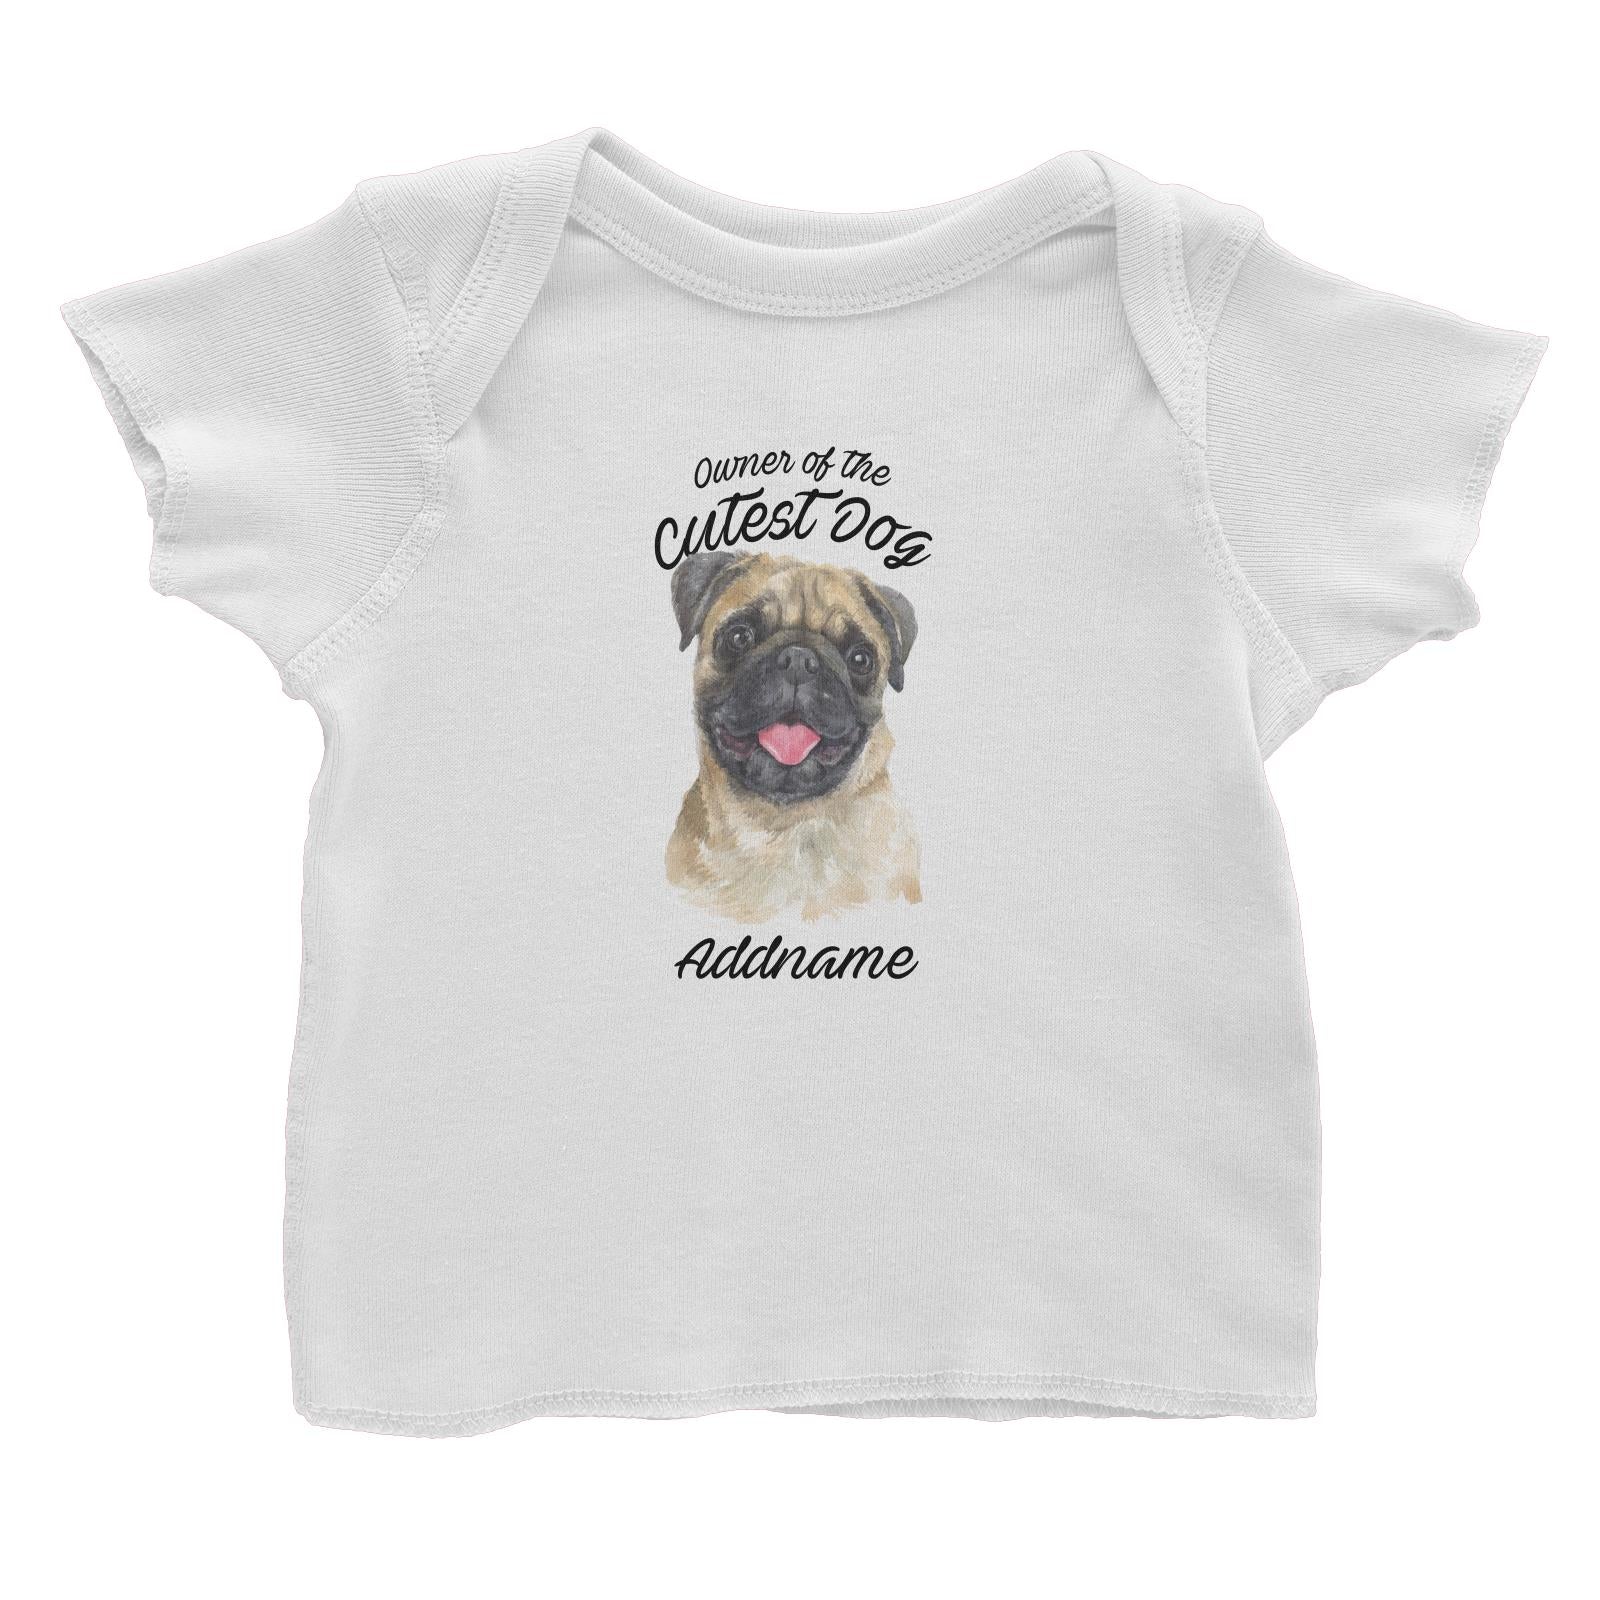 Watercolor Dog Owner Of The Cutest Dog Pug Addname Baby T-Shirt